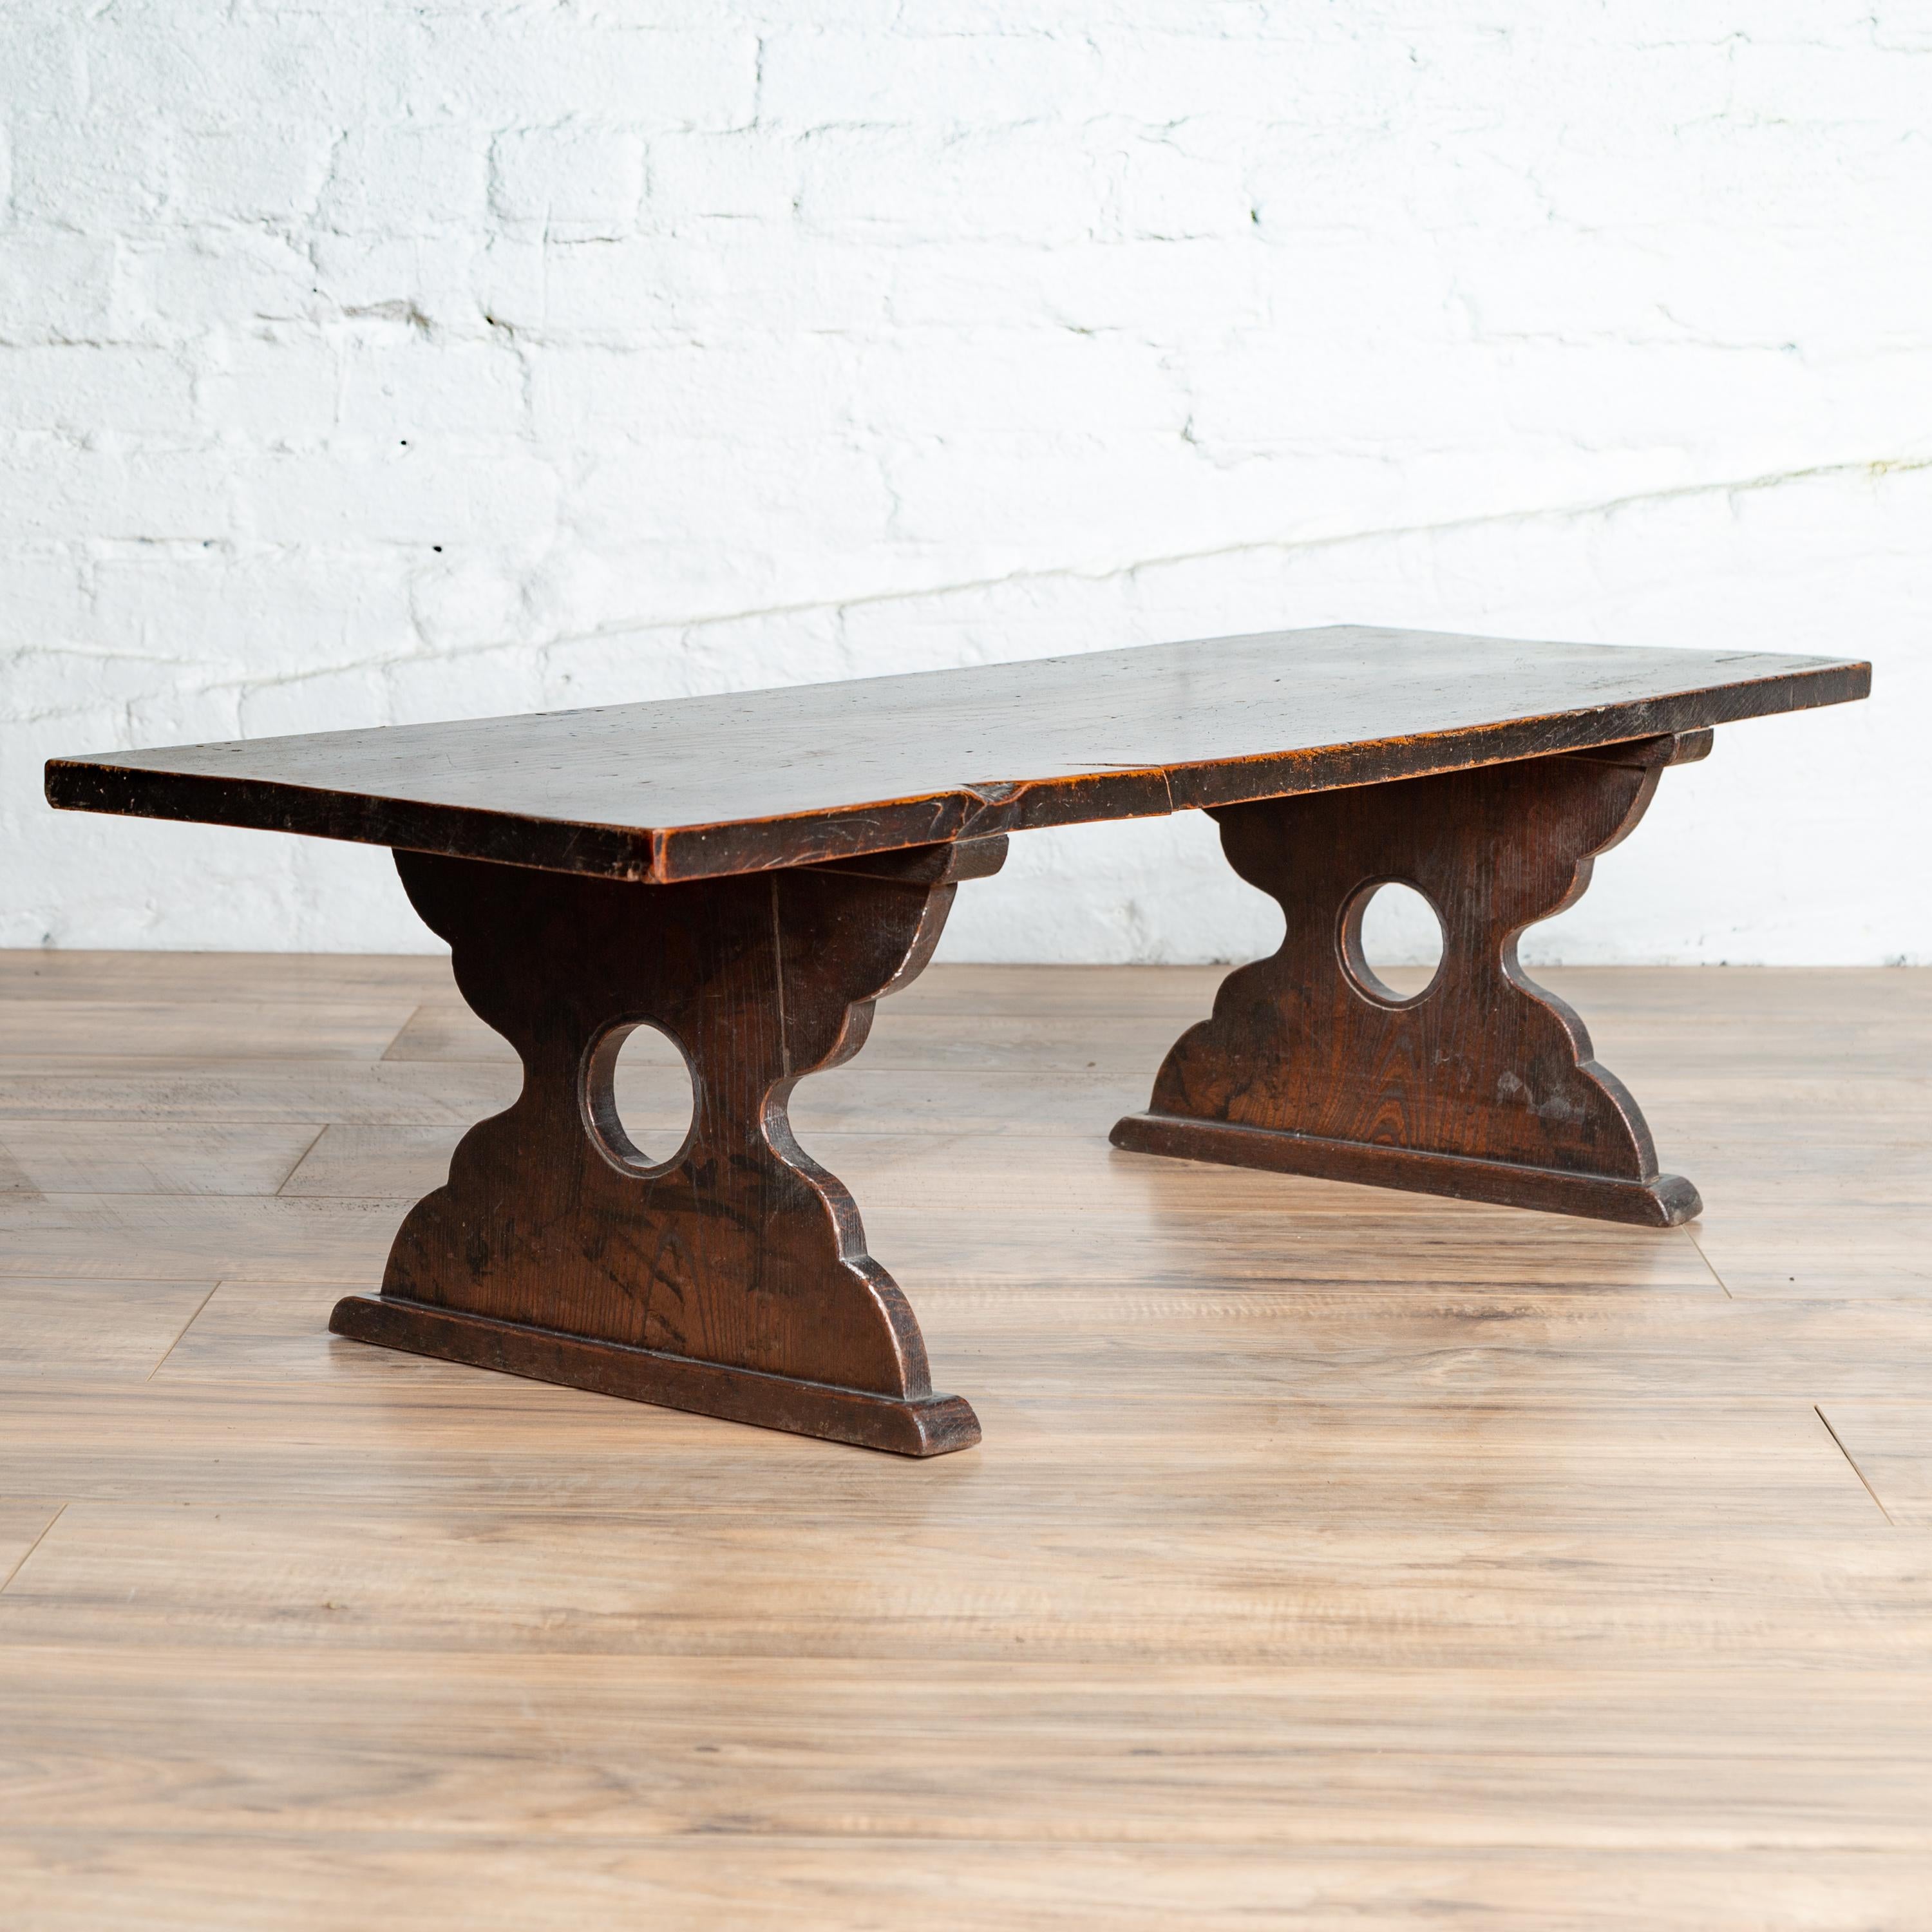 A petite Japanese keyaki wood low prayer table from the 19th century with curving leg supports. Found in Kyoto and made of a very strong and beautifully grained wood, this Japanese low prayer table features a rectangular top sitting above two nicely